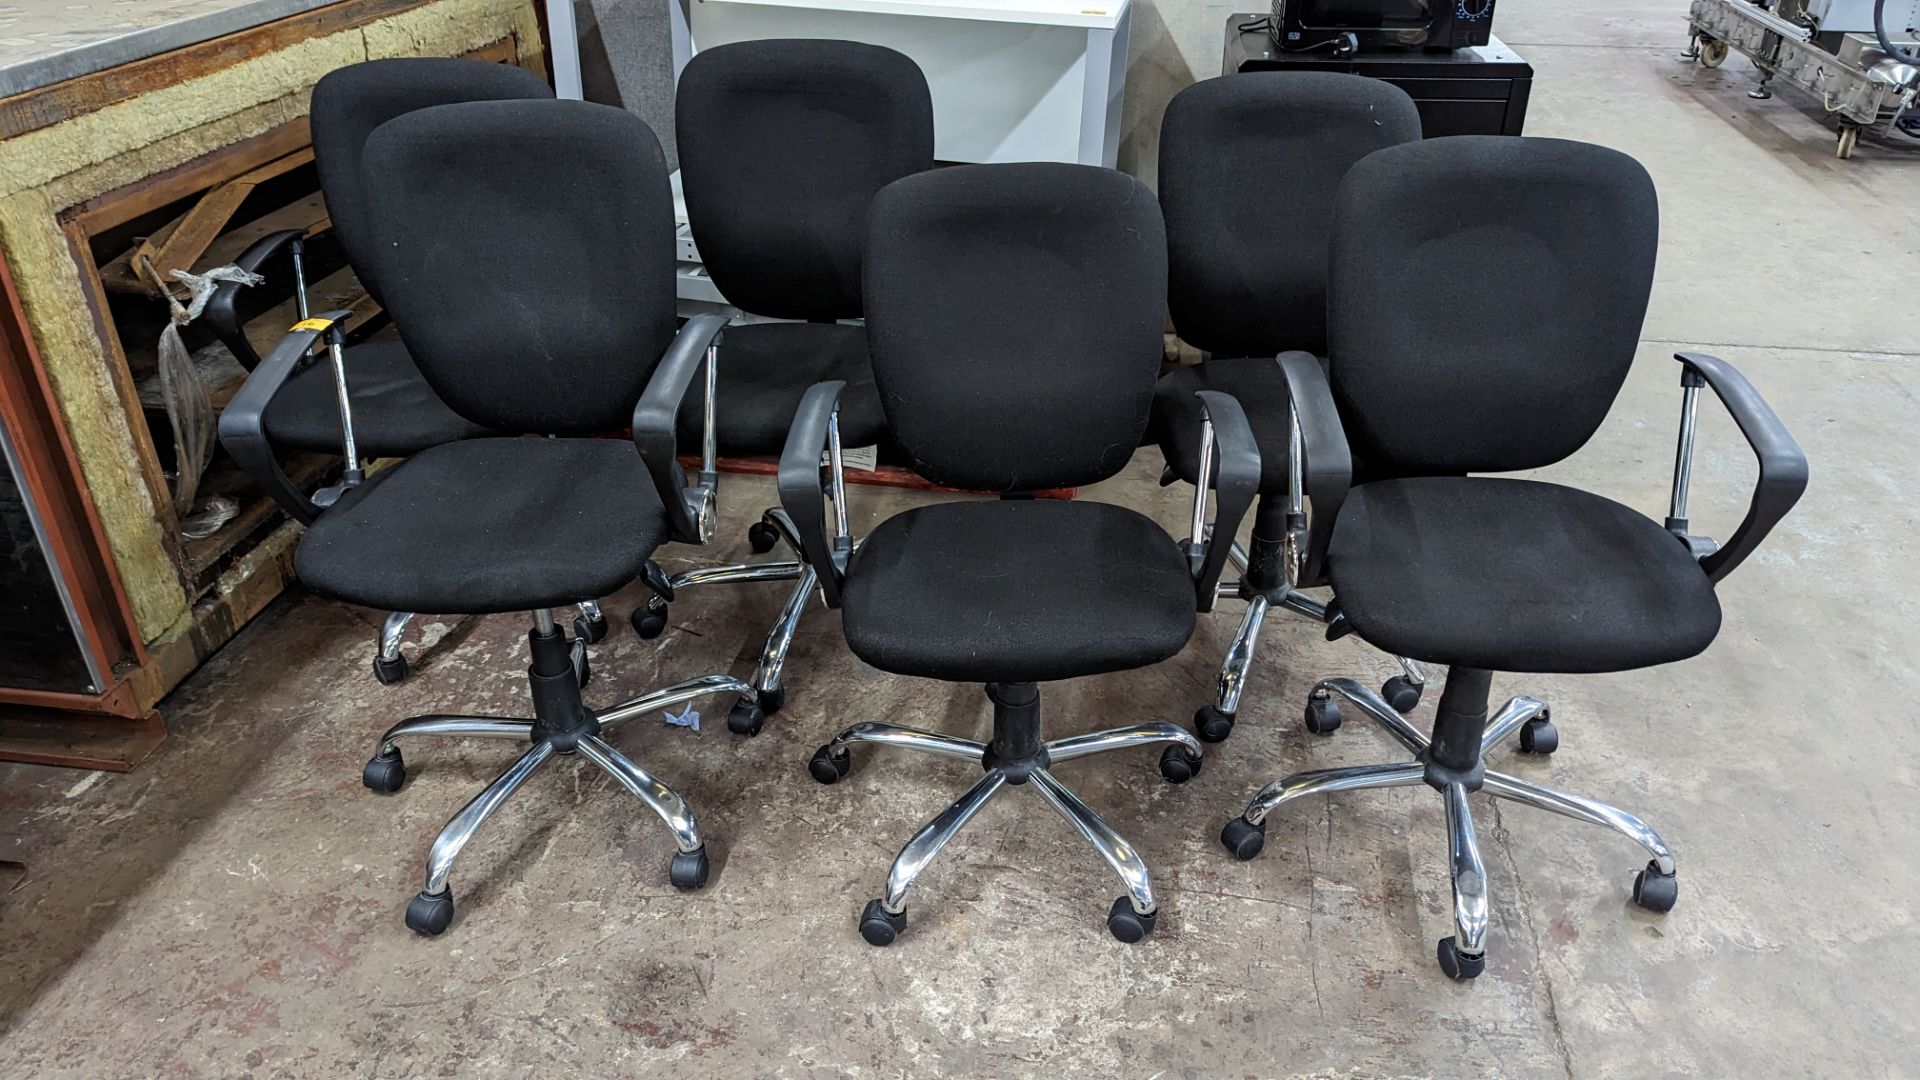 6 off matching chairs with arms